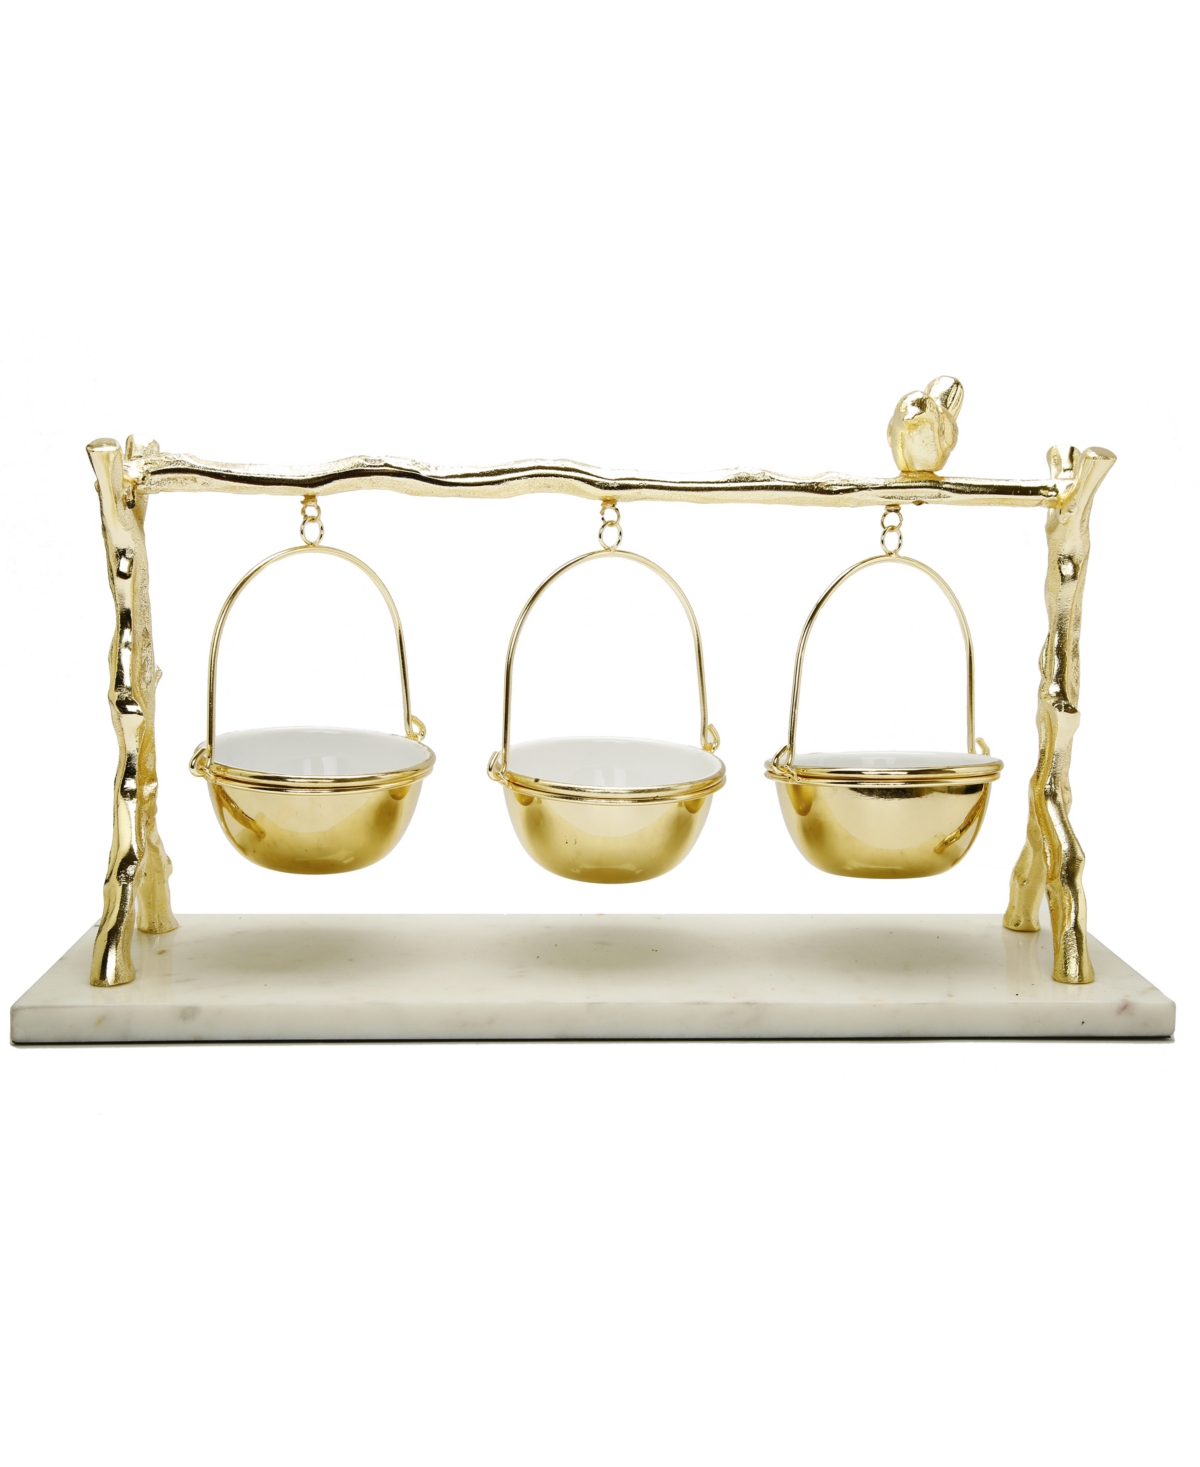 3 Hanging Bowls on Branch and Bird Stand with Marble Base - Gold-Tone